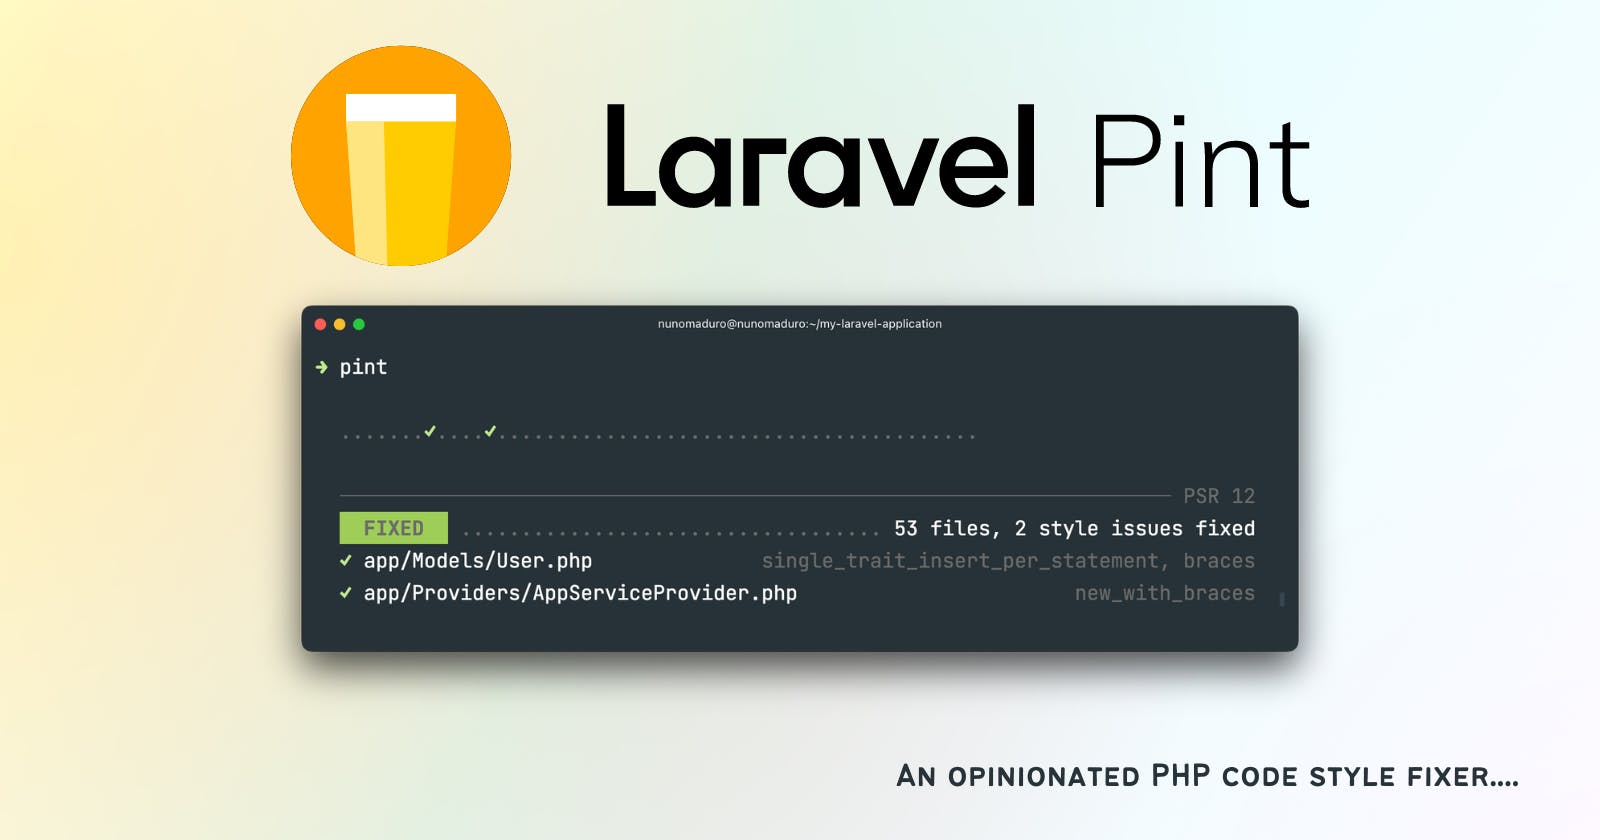 Laravel Pint – A Minimalist Code Style Fixer for PHP